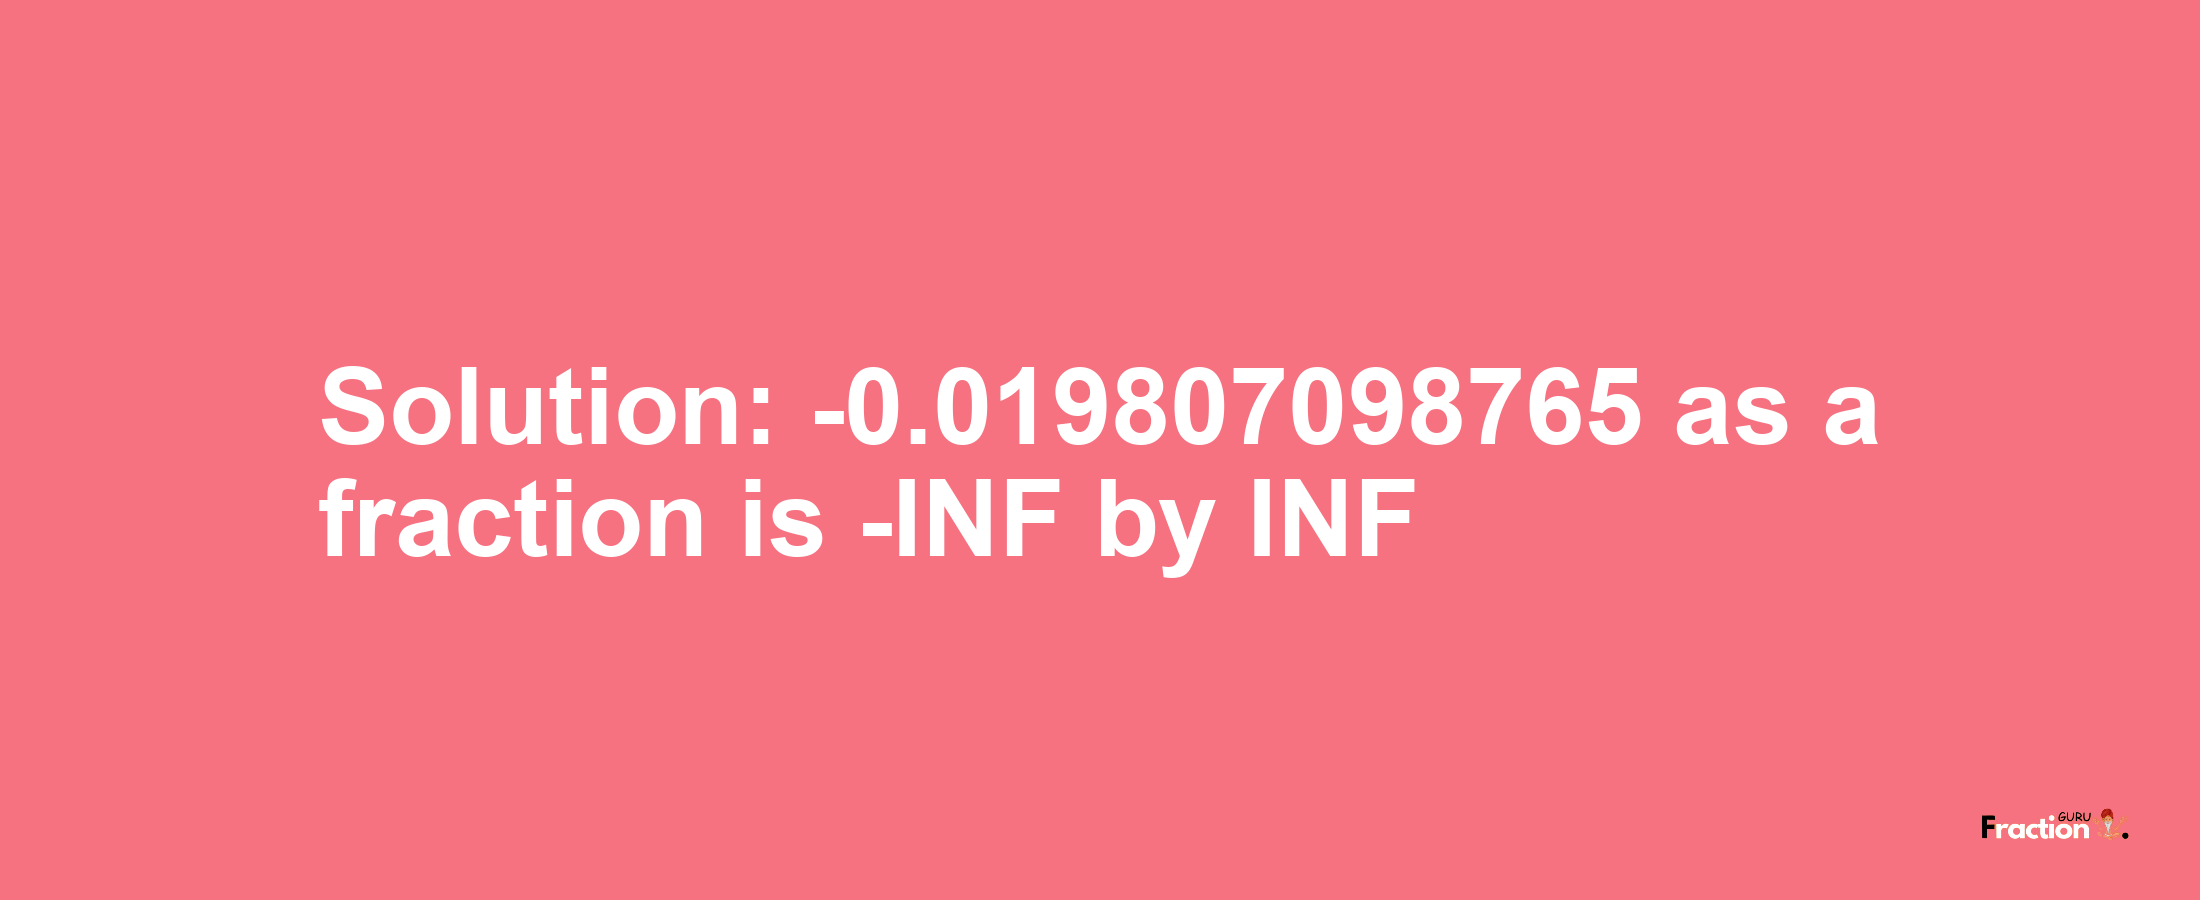 Solution:-0.019807098765 as a fraction is -INF/INF